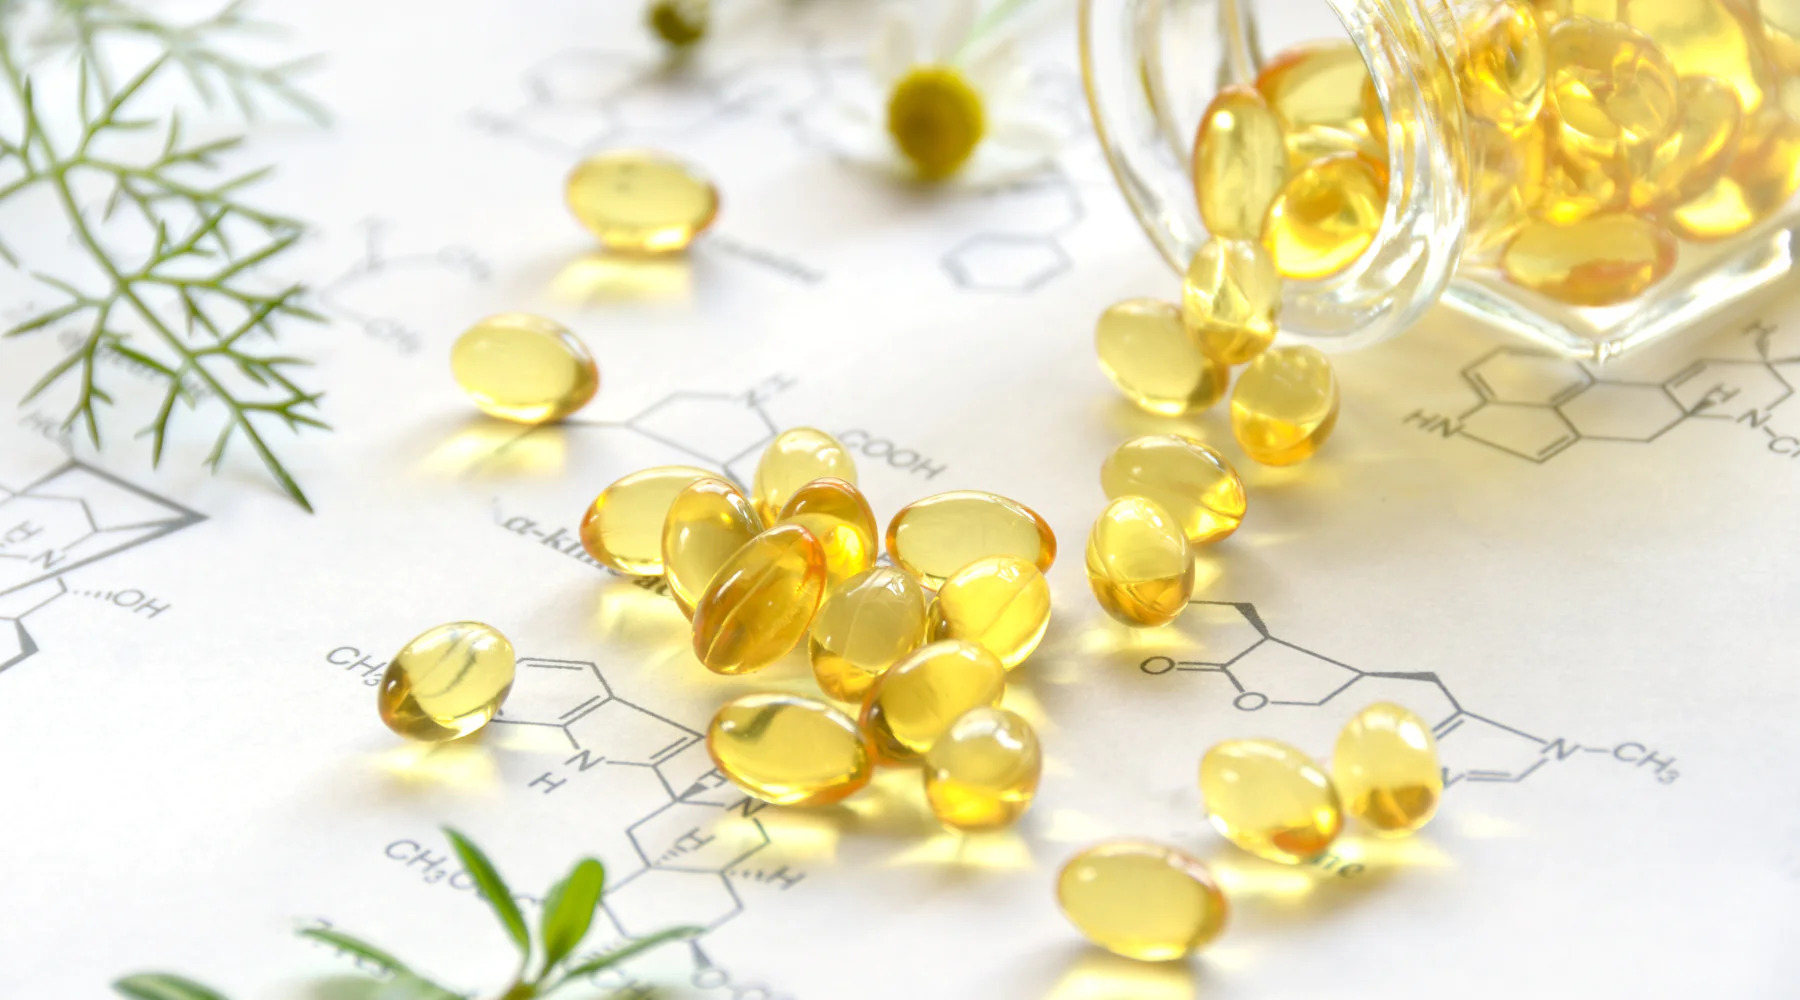 ARE SUPPLEMENTS NECESSARY OR SIMPLY A FAD?